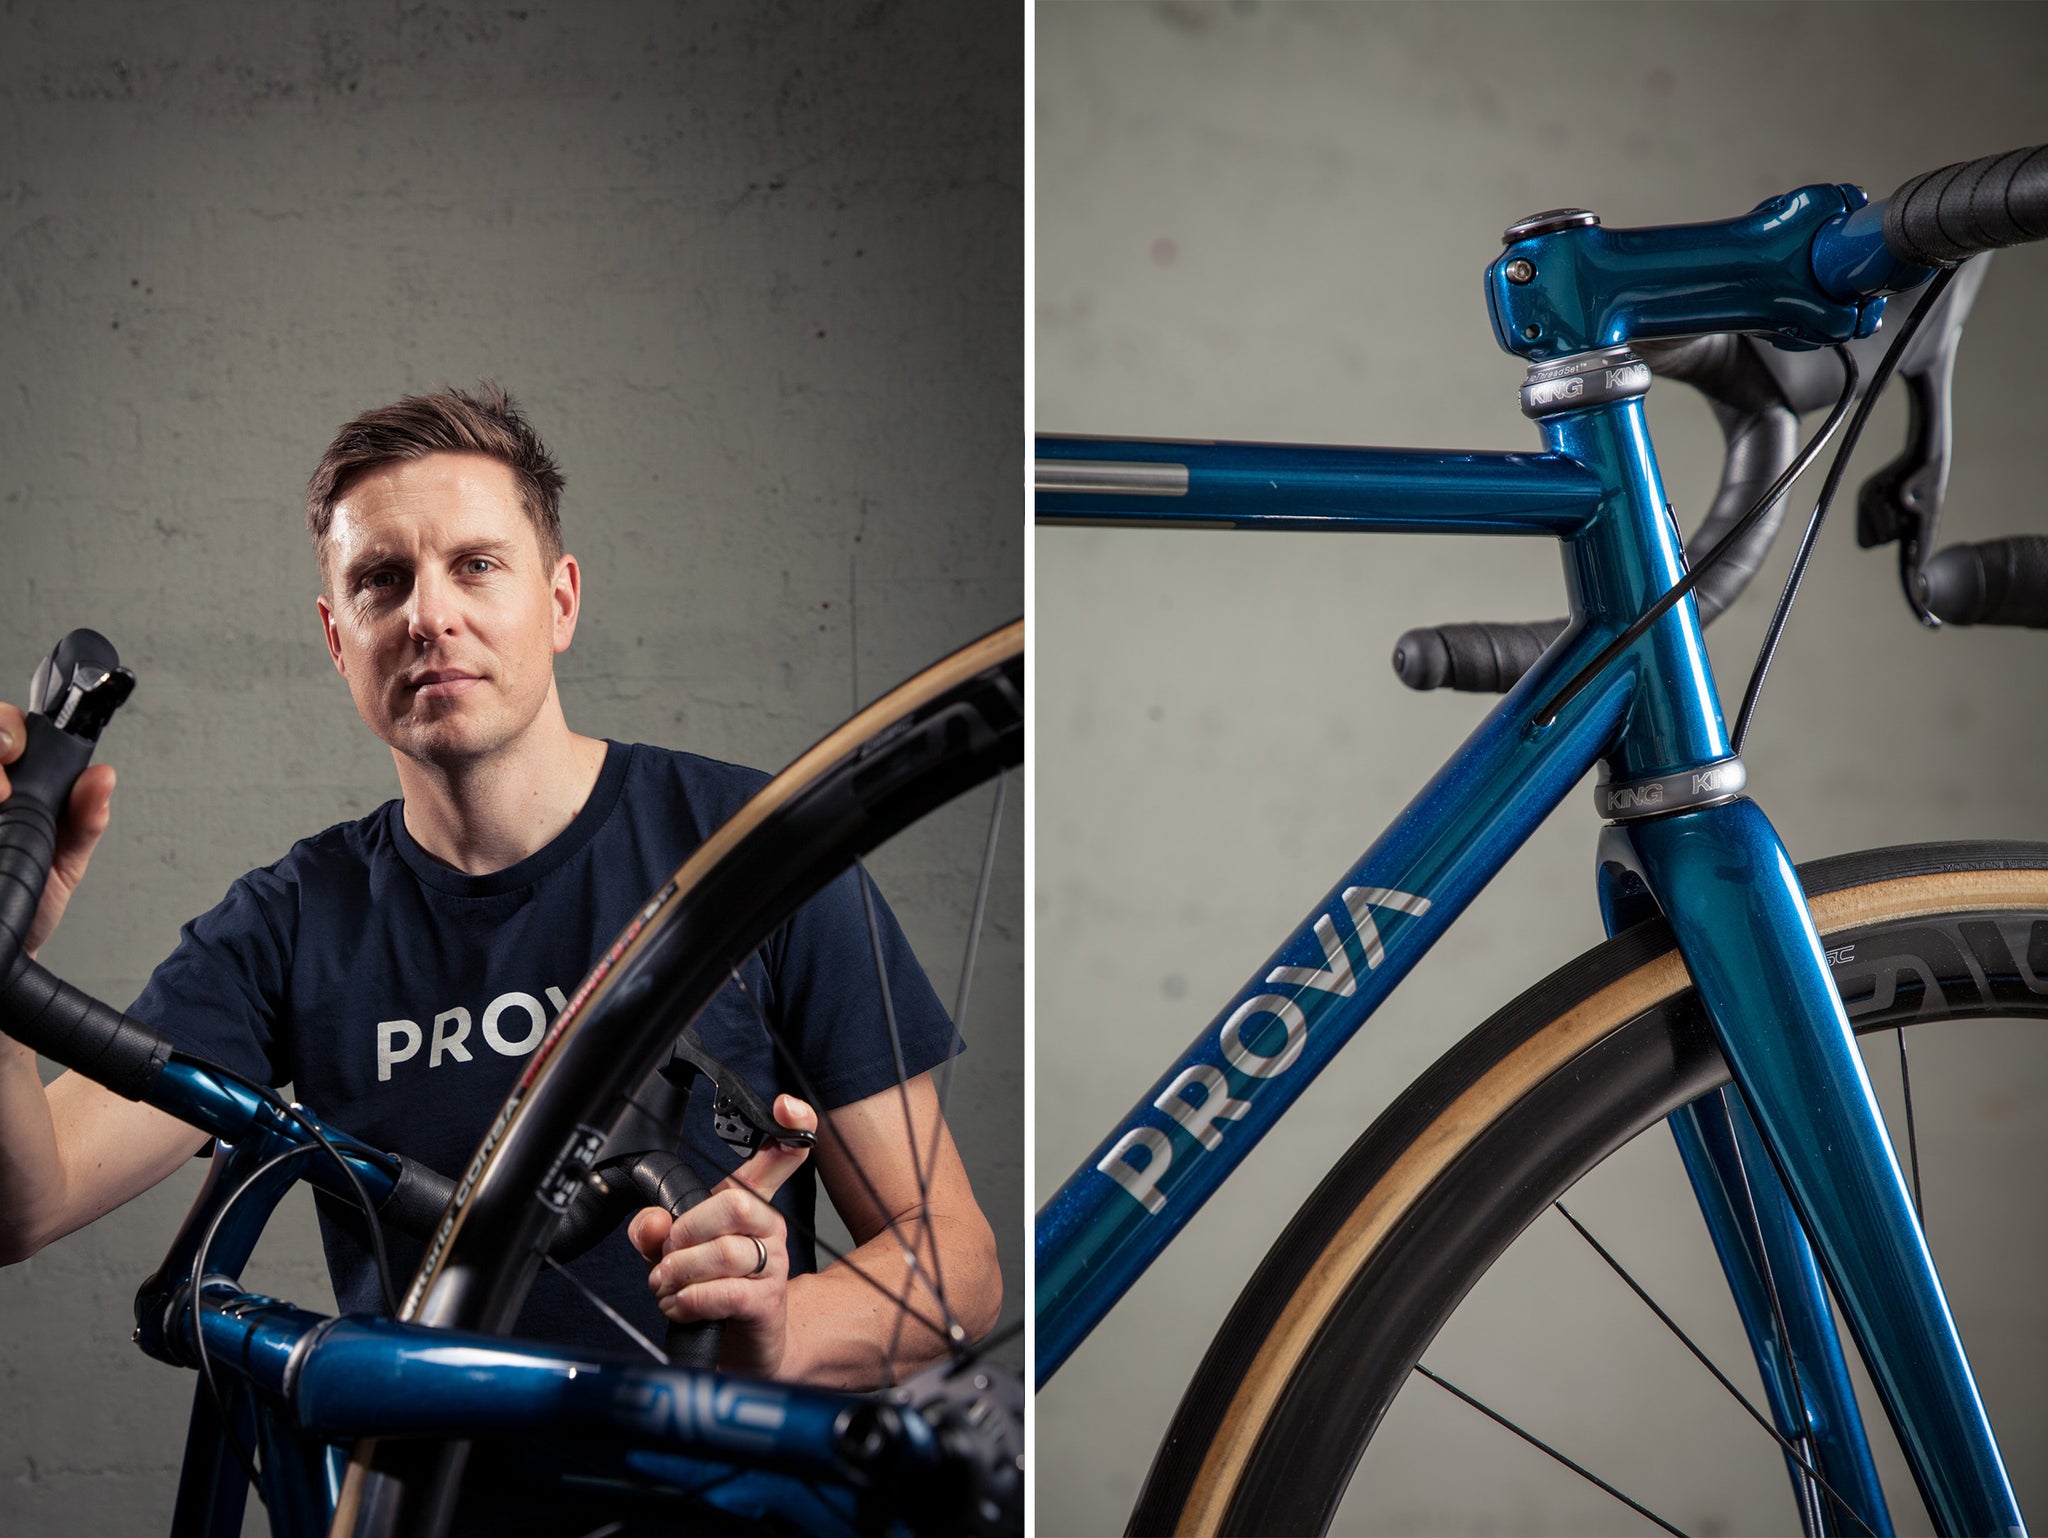 who is mark hester prova cycles